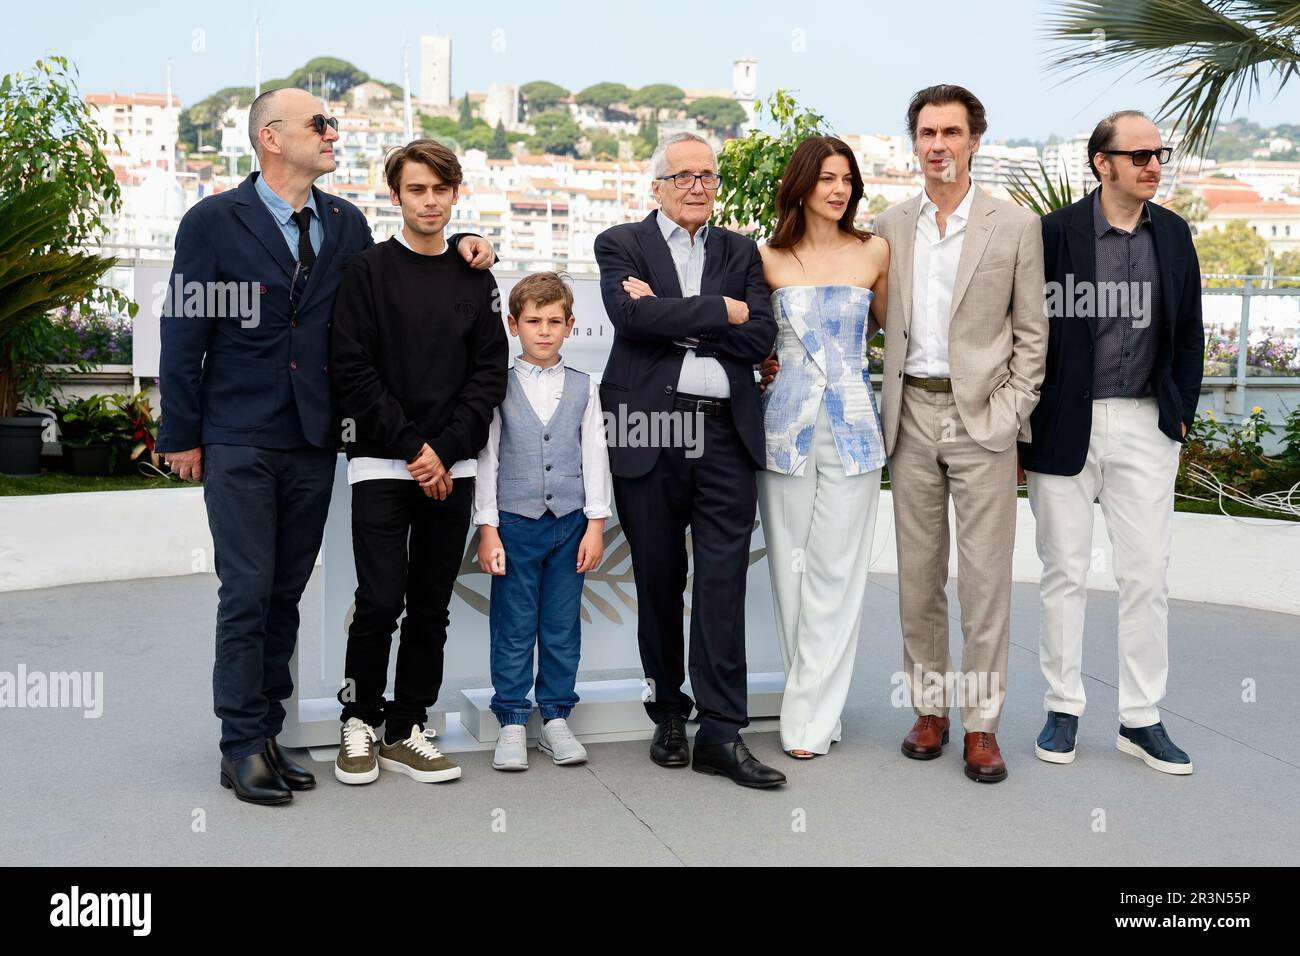 Paolo Pierobon, Fausto Russo Alesi, Enea Sala, Marco Bellocchio, Barbara Ronchi, Fabrizio Gifuni and Leonardo Maltese attend the 'Kidnapped' photocall during the 76th Cannes Film Festival at Palais des Festivals in Cannes, France, on 24 May 2023. Stock Photo